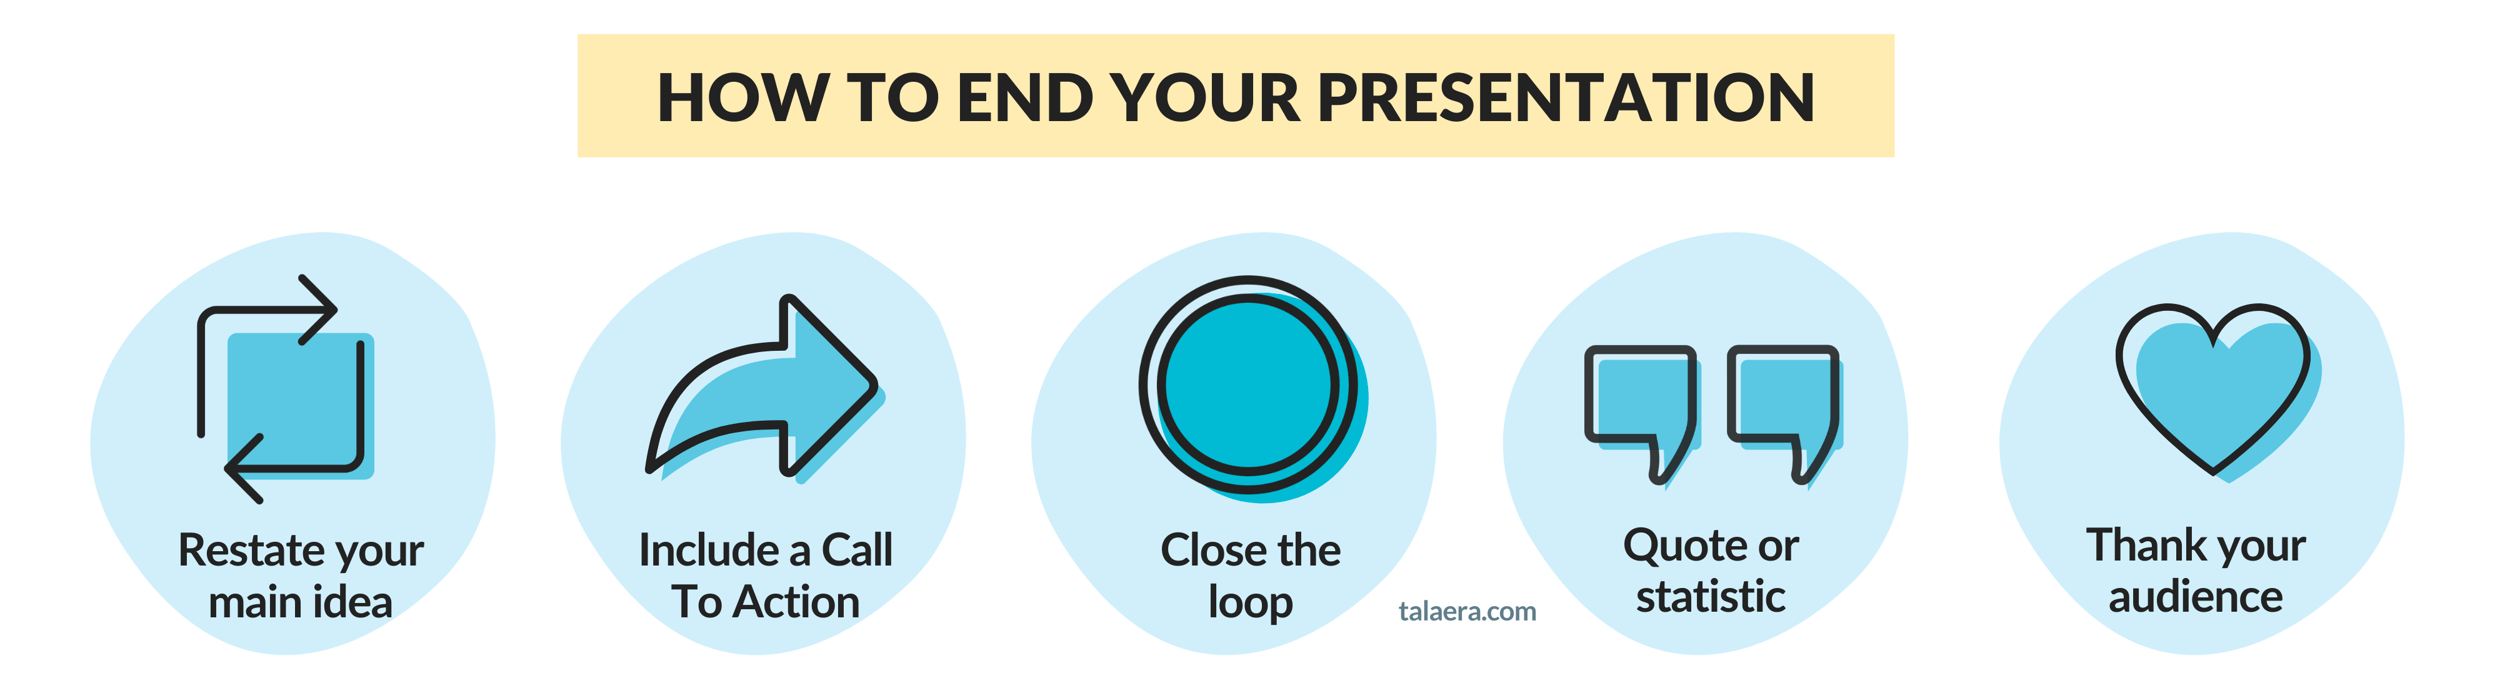 how to end the presentation slide